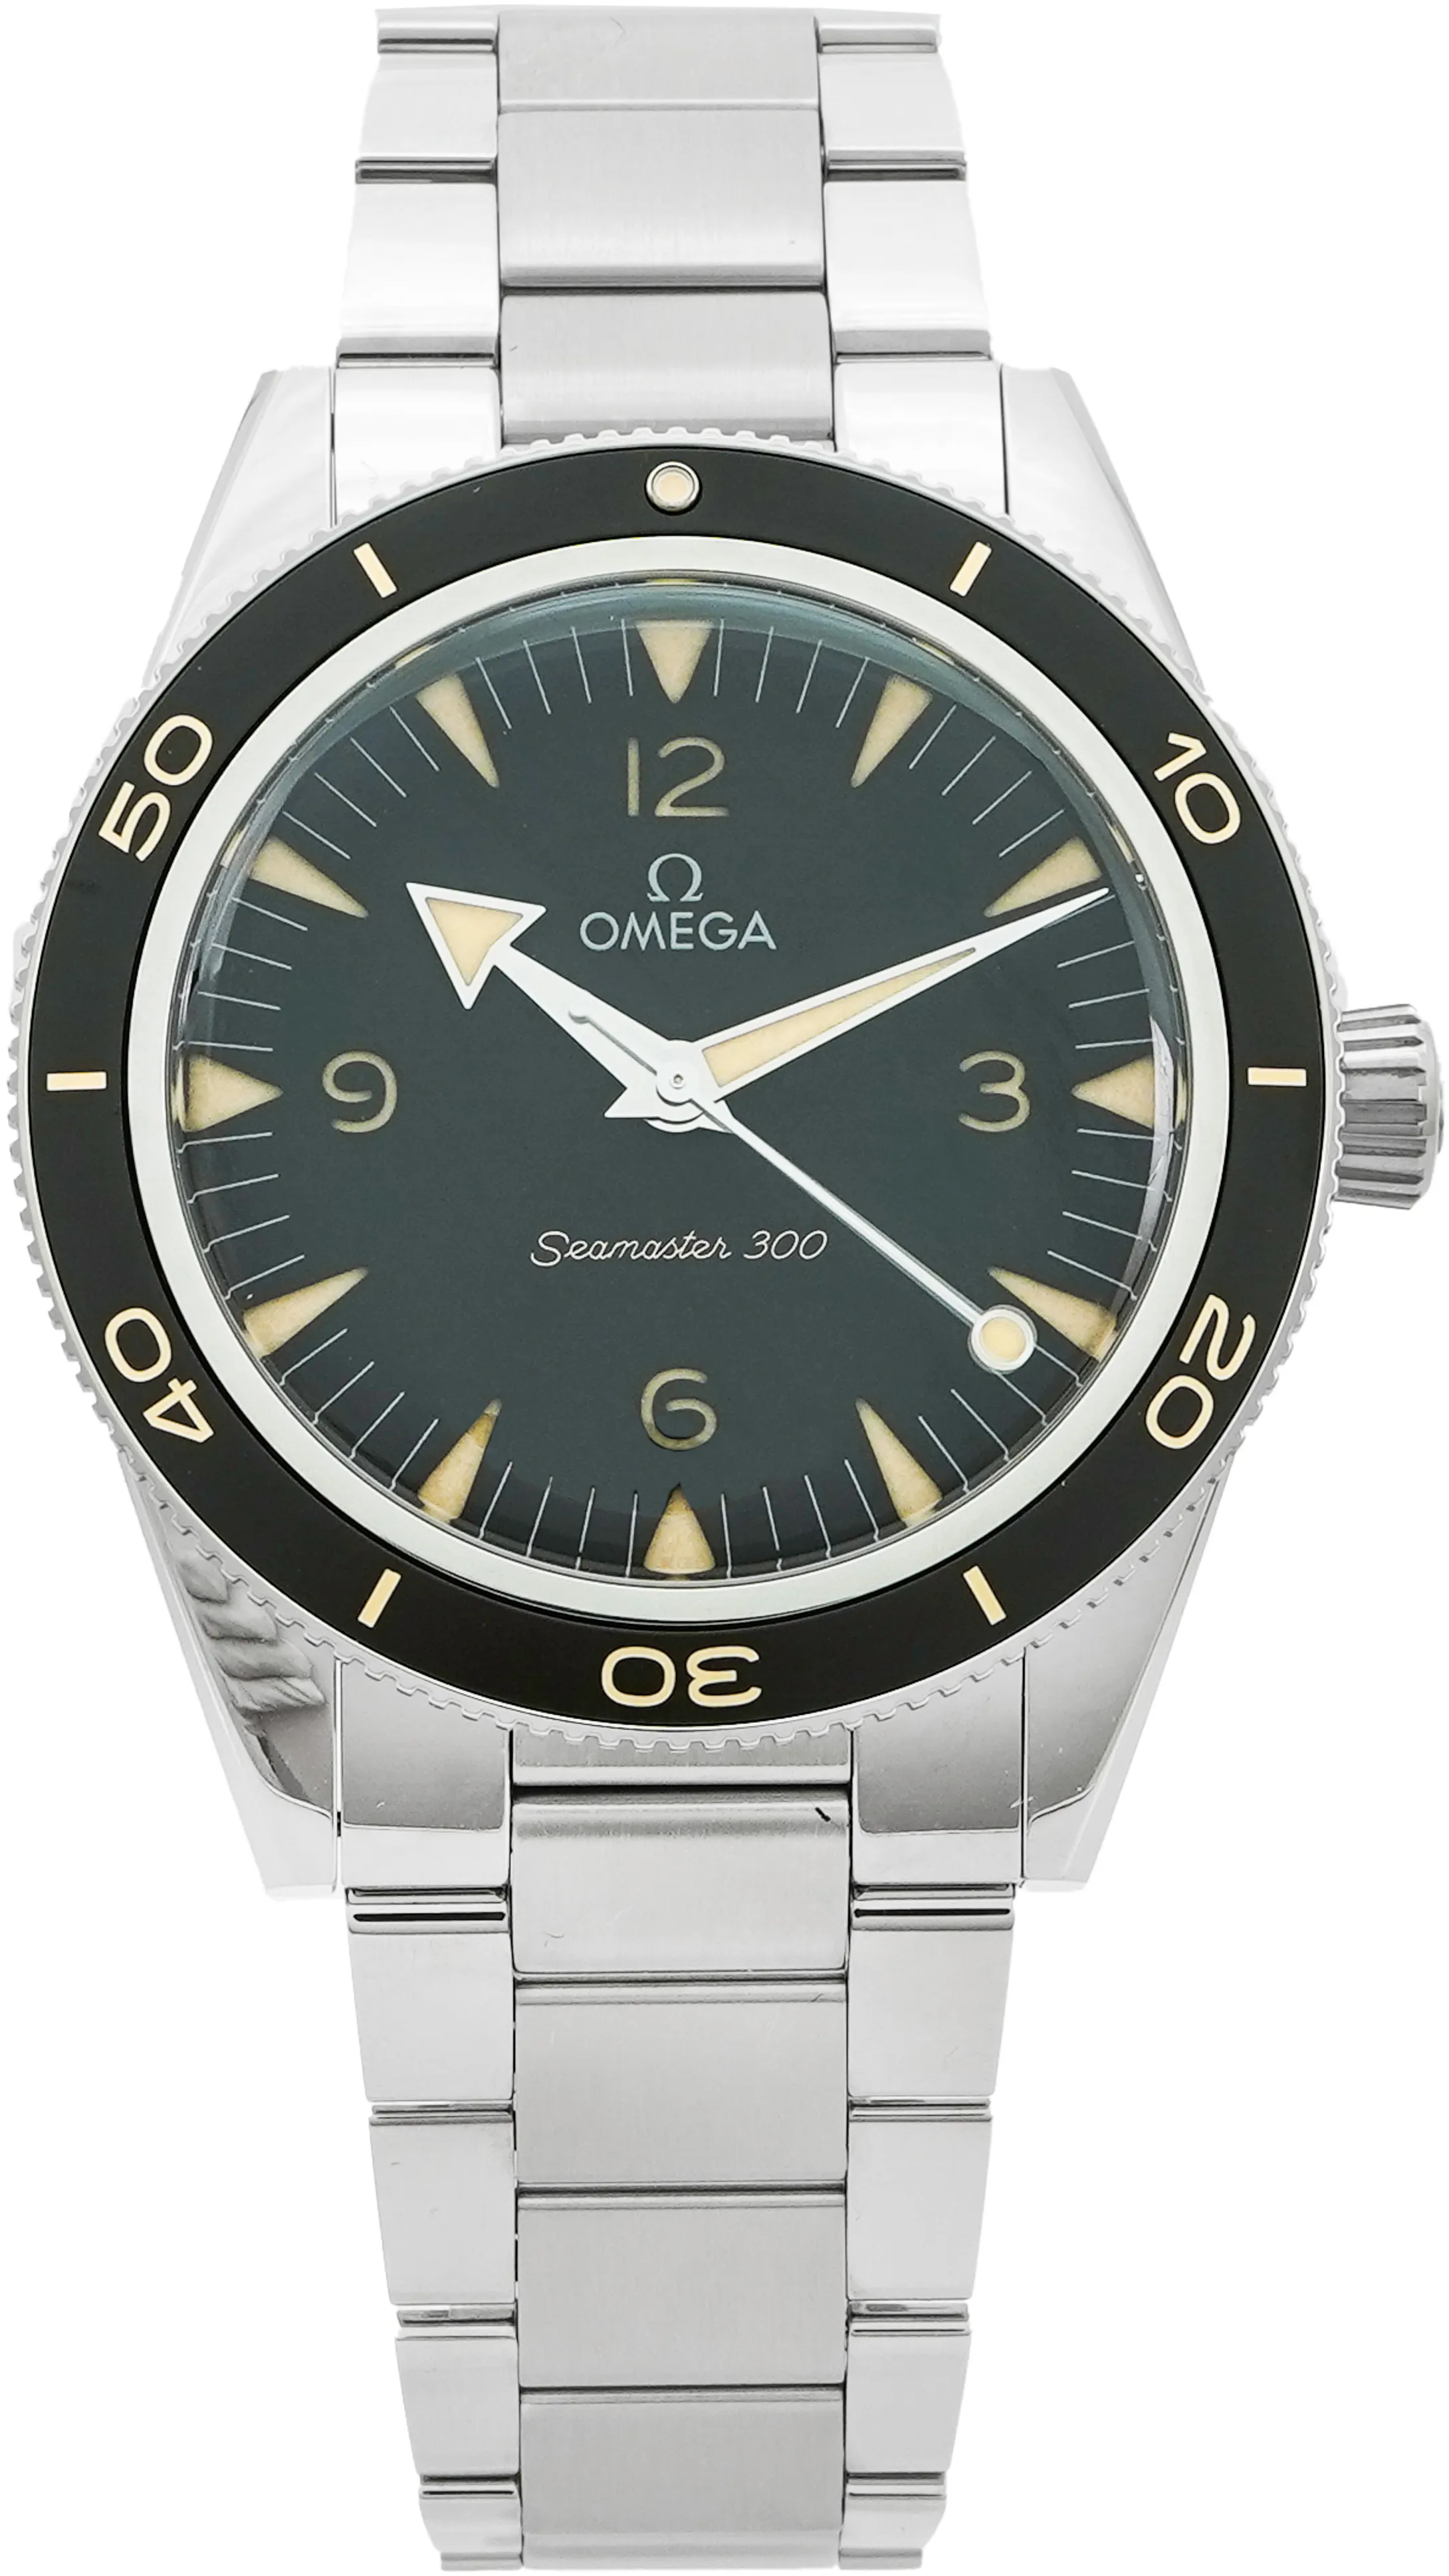 Omega Seamaster 300 234.30.41.21.01.001 41mm Stainless steel